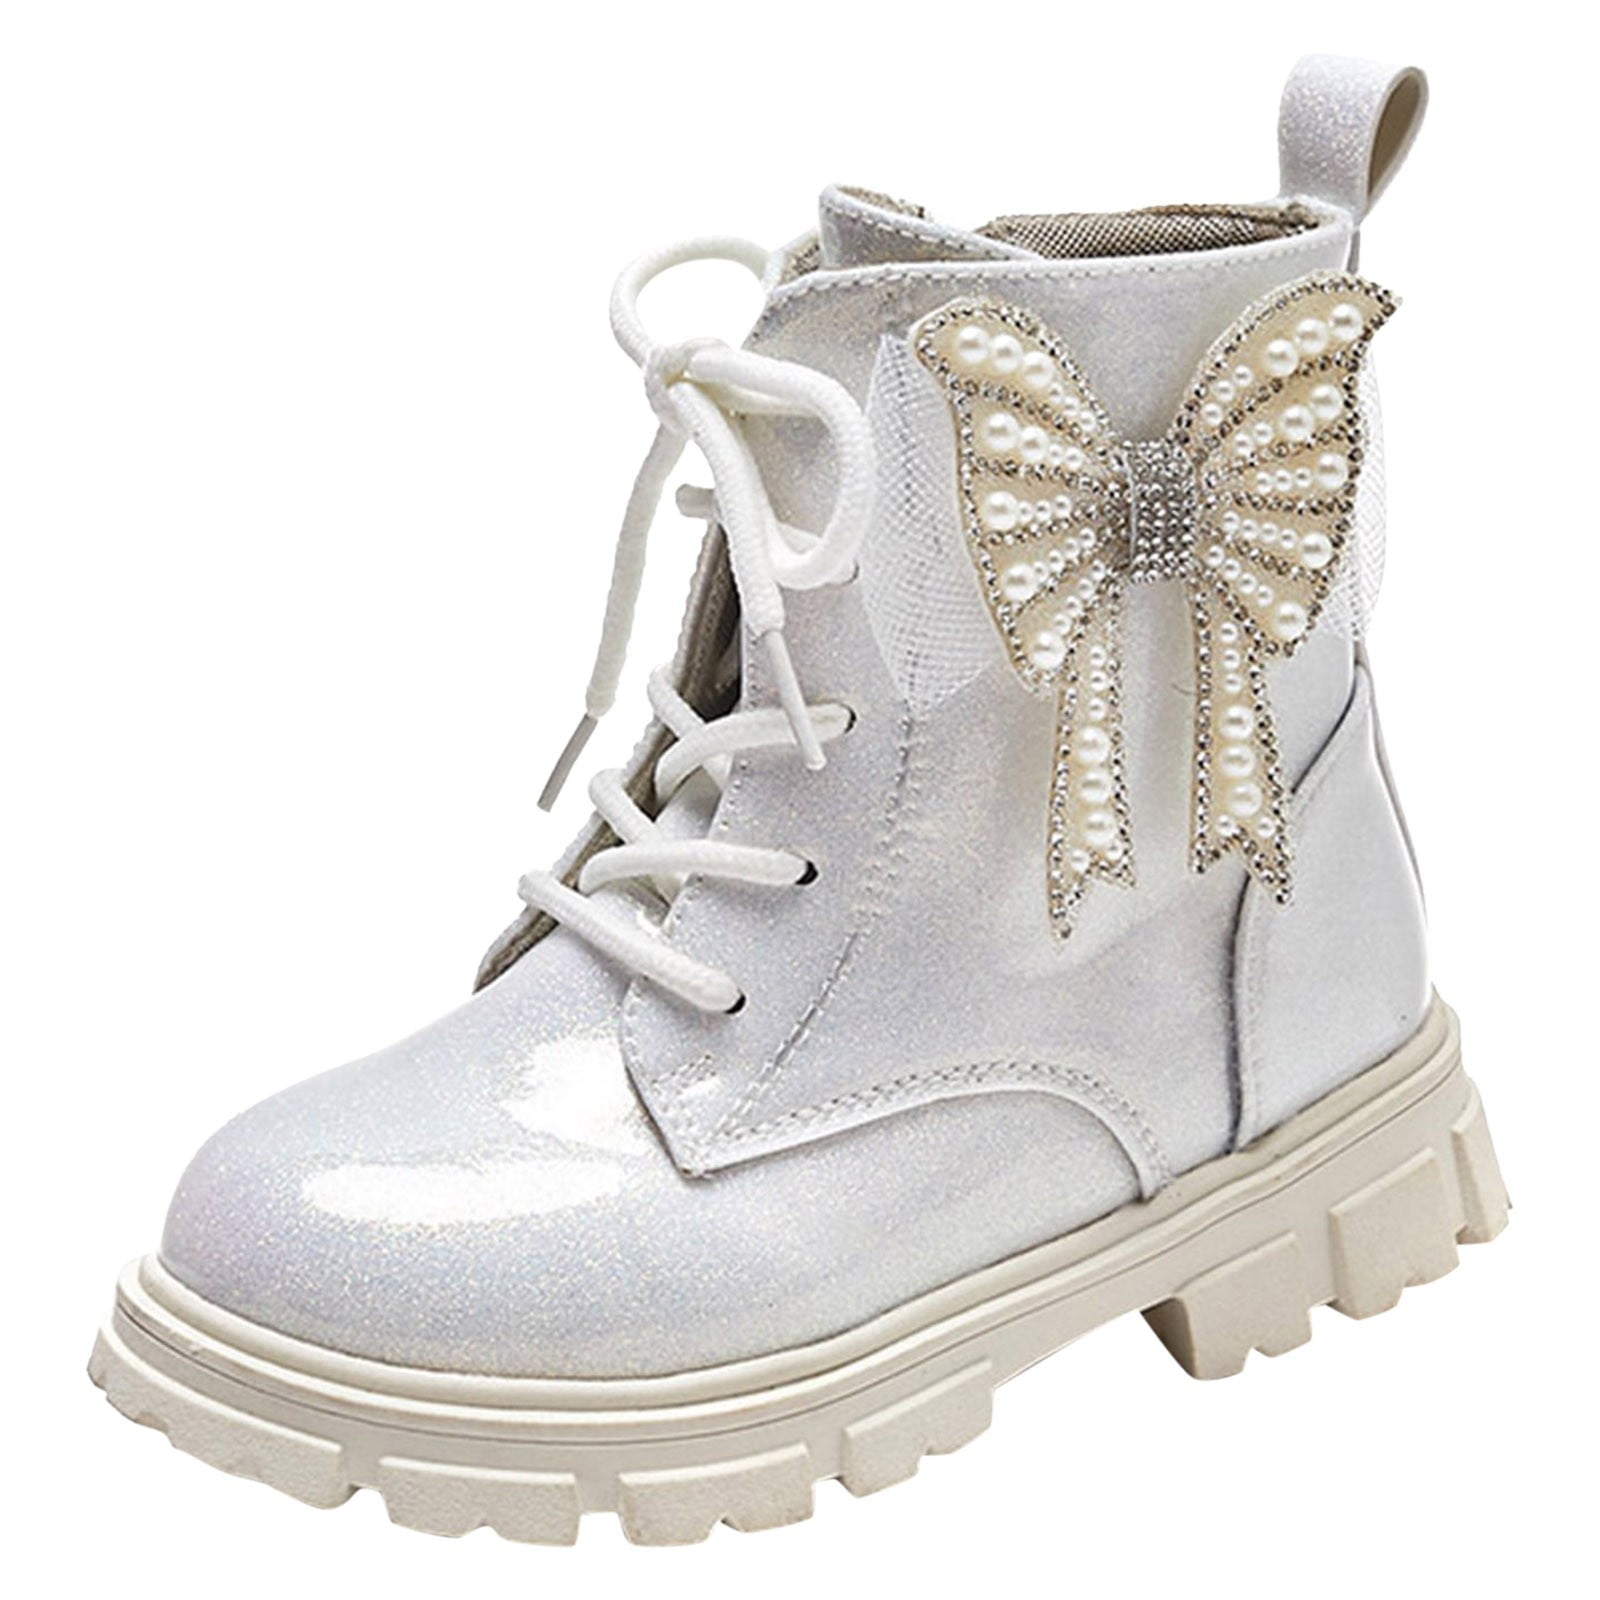 Cathalem Shoes Girls Little Kid Female High Heels for Kids Size 13 Korean Edition New Children s Girls Soft Sole Boots Child Ski Boots Silver 11 c2373cf4 9d91 4e4c ad6d c539f4889b0a.c654df2092639ad784862a6c9b3f7c04